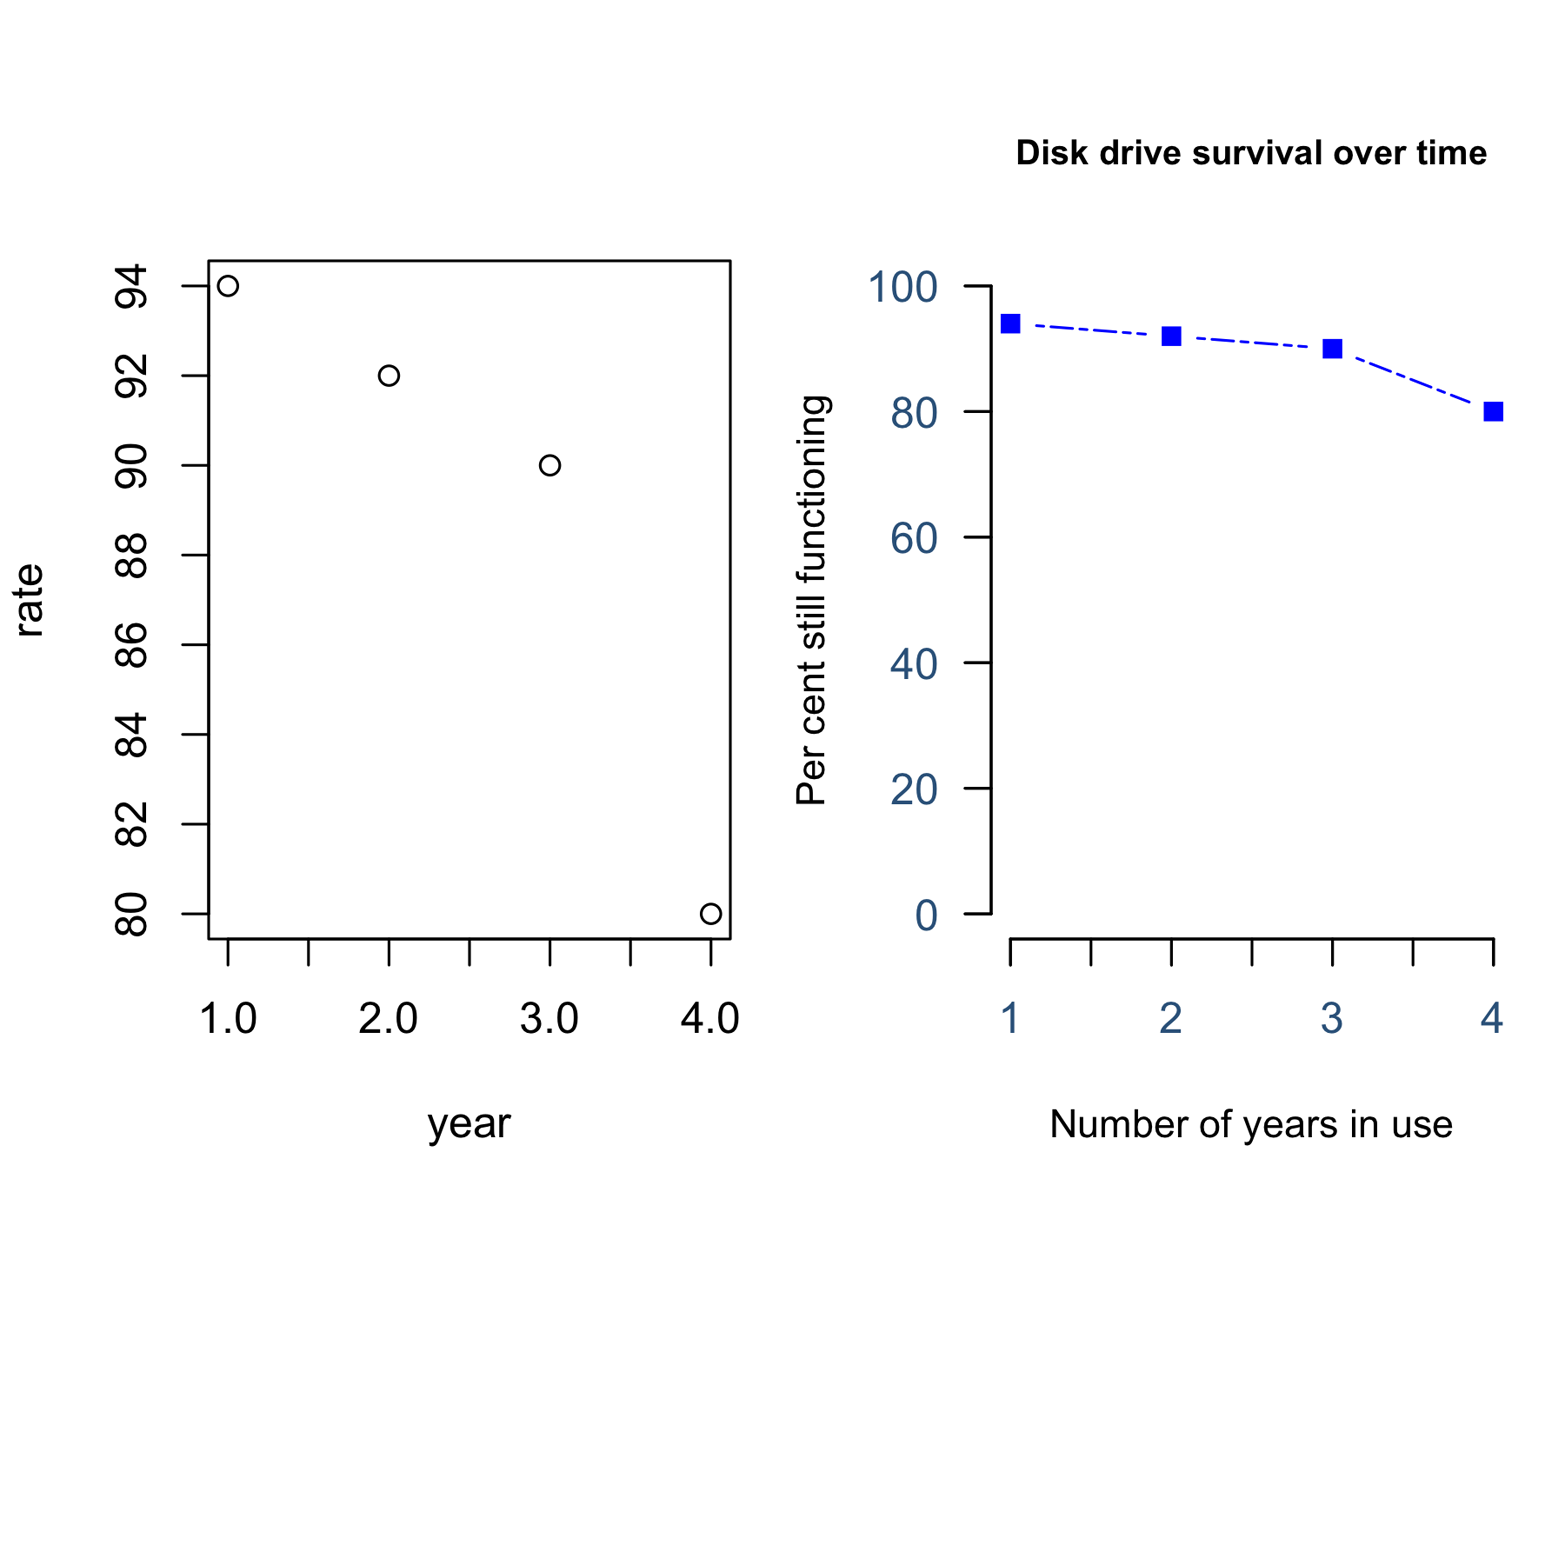 The plot on the left side, disk drive survival rate versus years in use, was created by the simple command: plot(year,rate). The plot on the right is customized and required many choices. How many differences do you see?